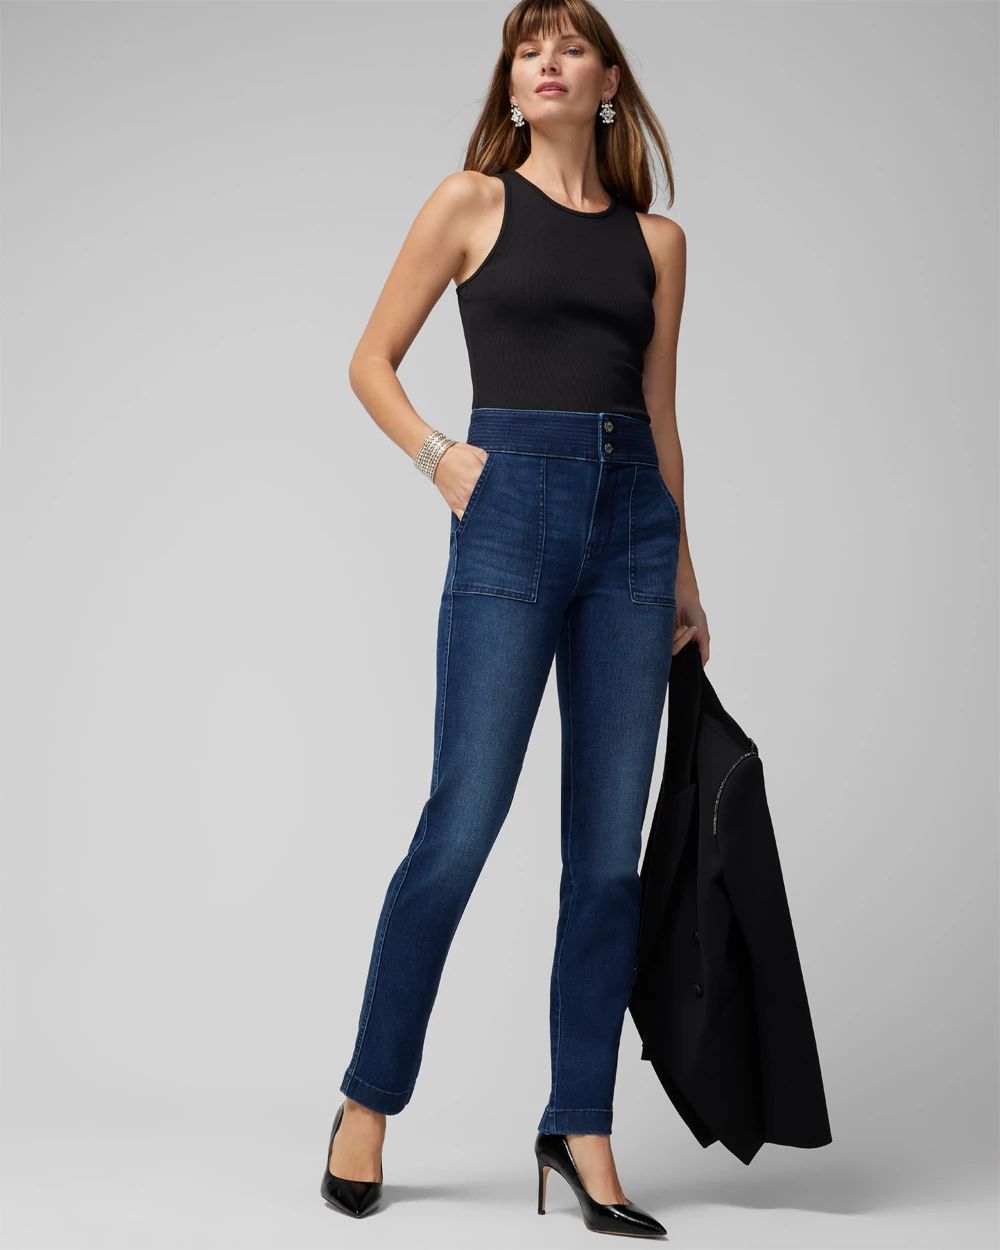 Extra High-Rise Everyday Soft Trapunto Slim Jeans click to view larger image.